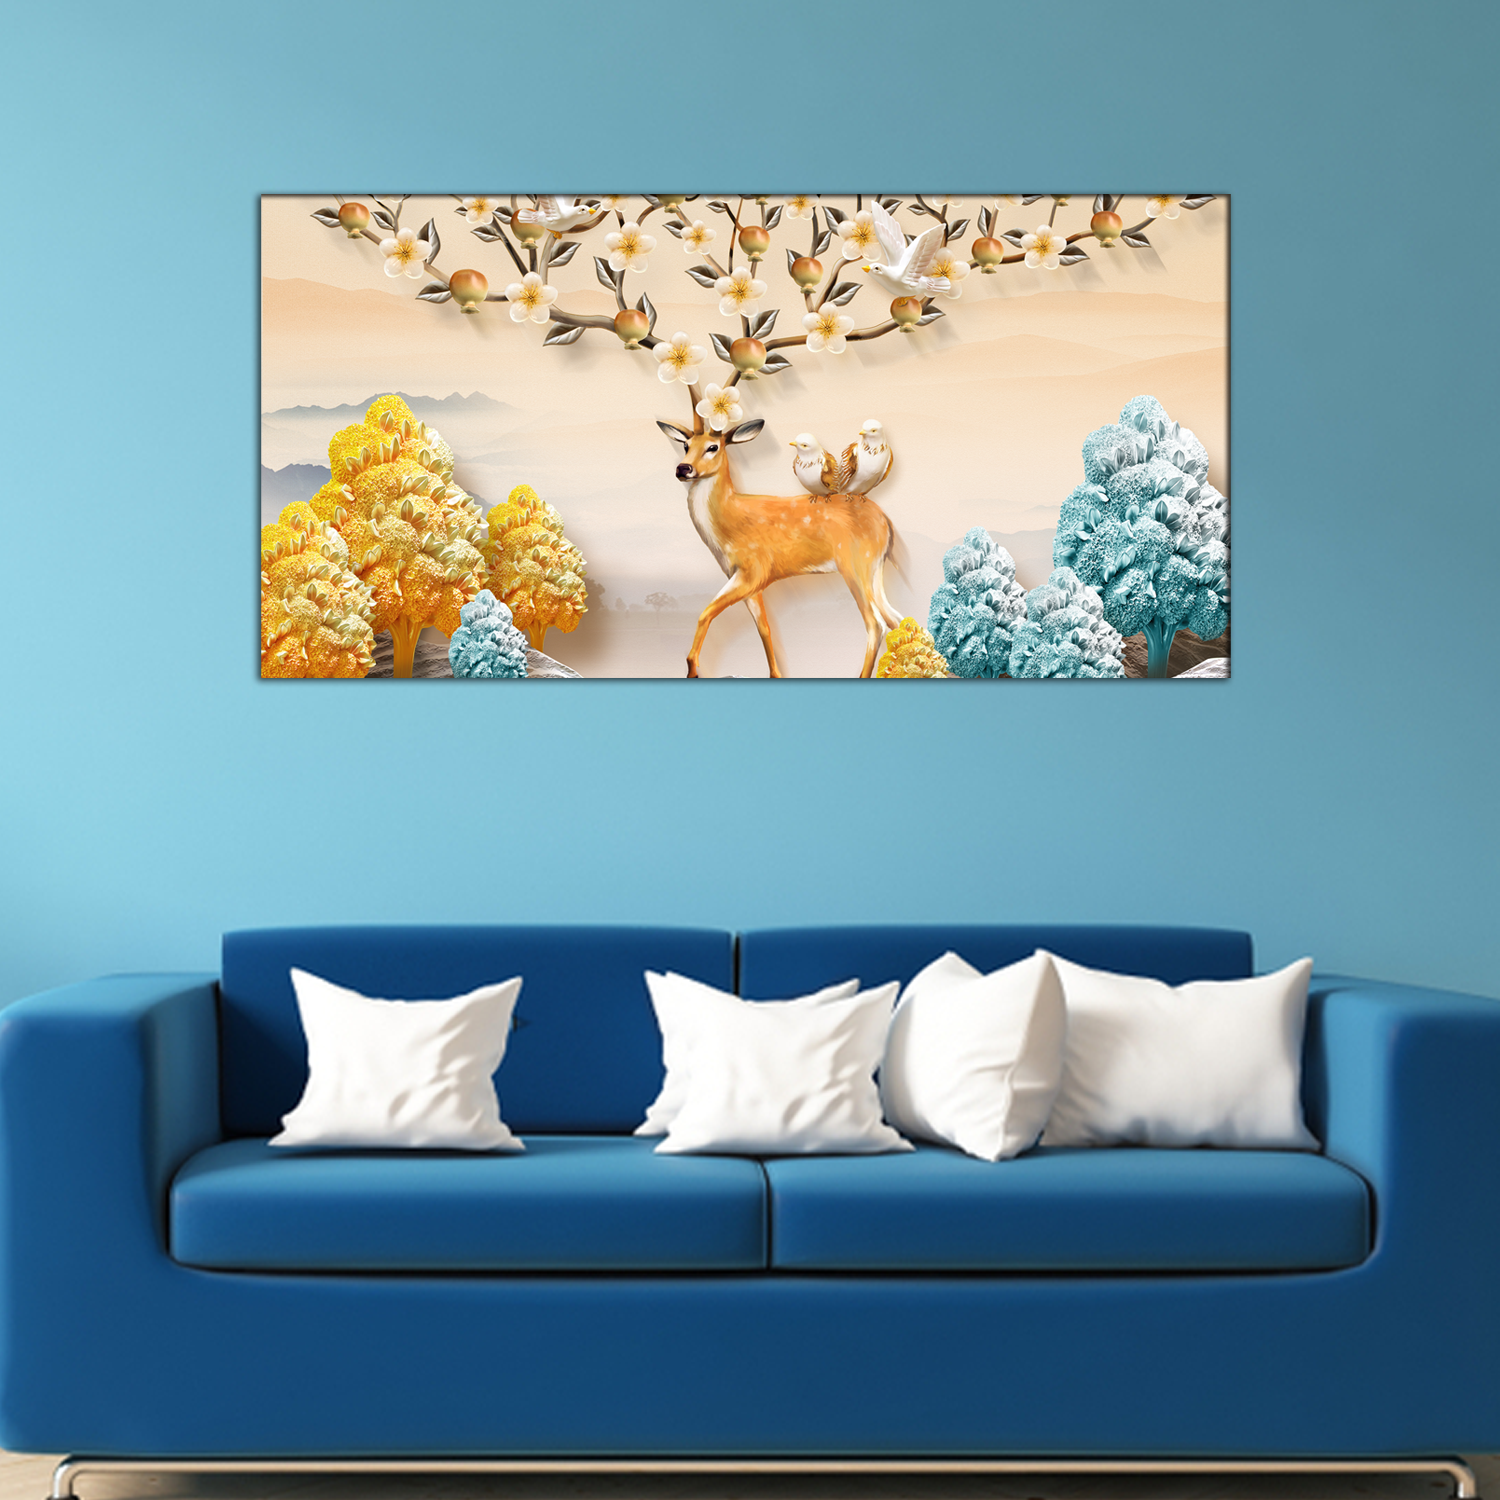 Deer, Leaves and Flowers Canvas Print Wall Painting